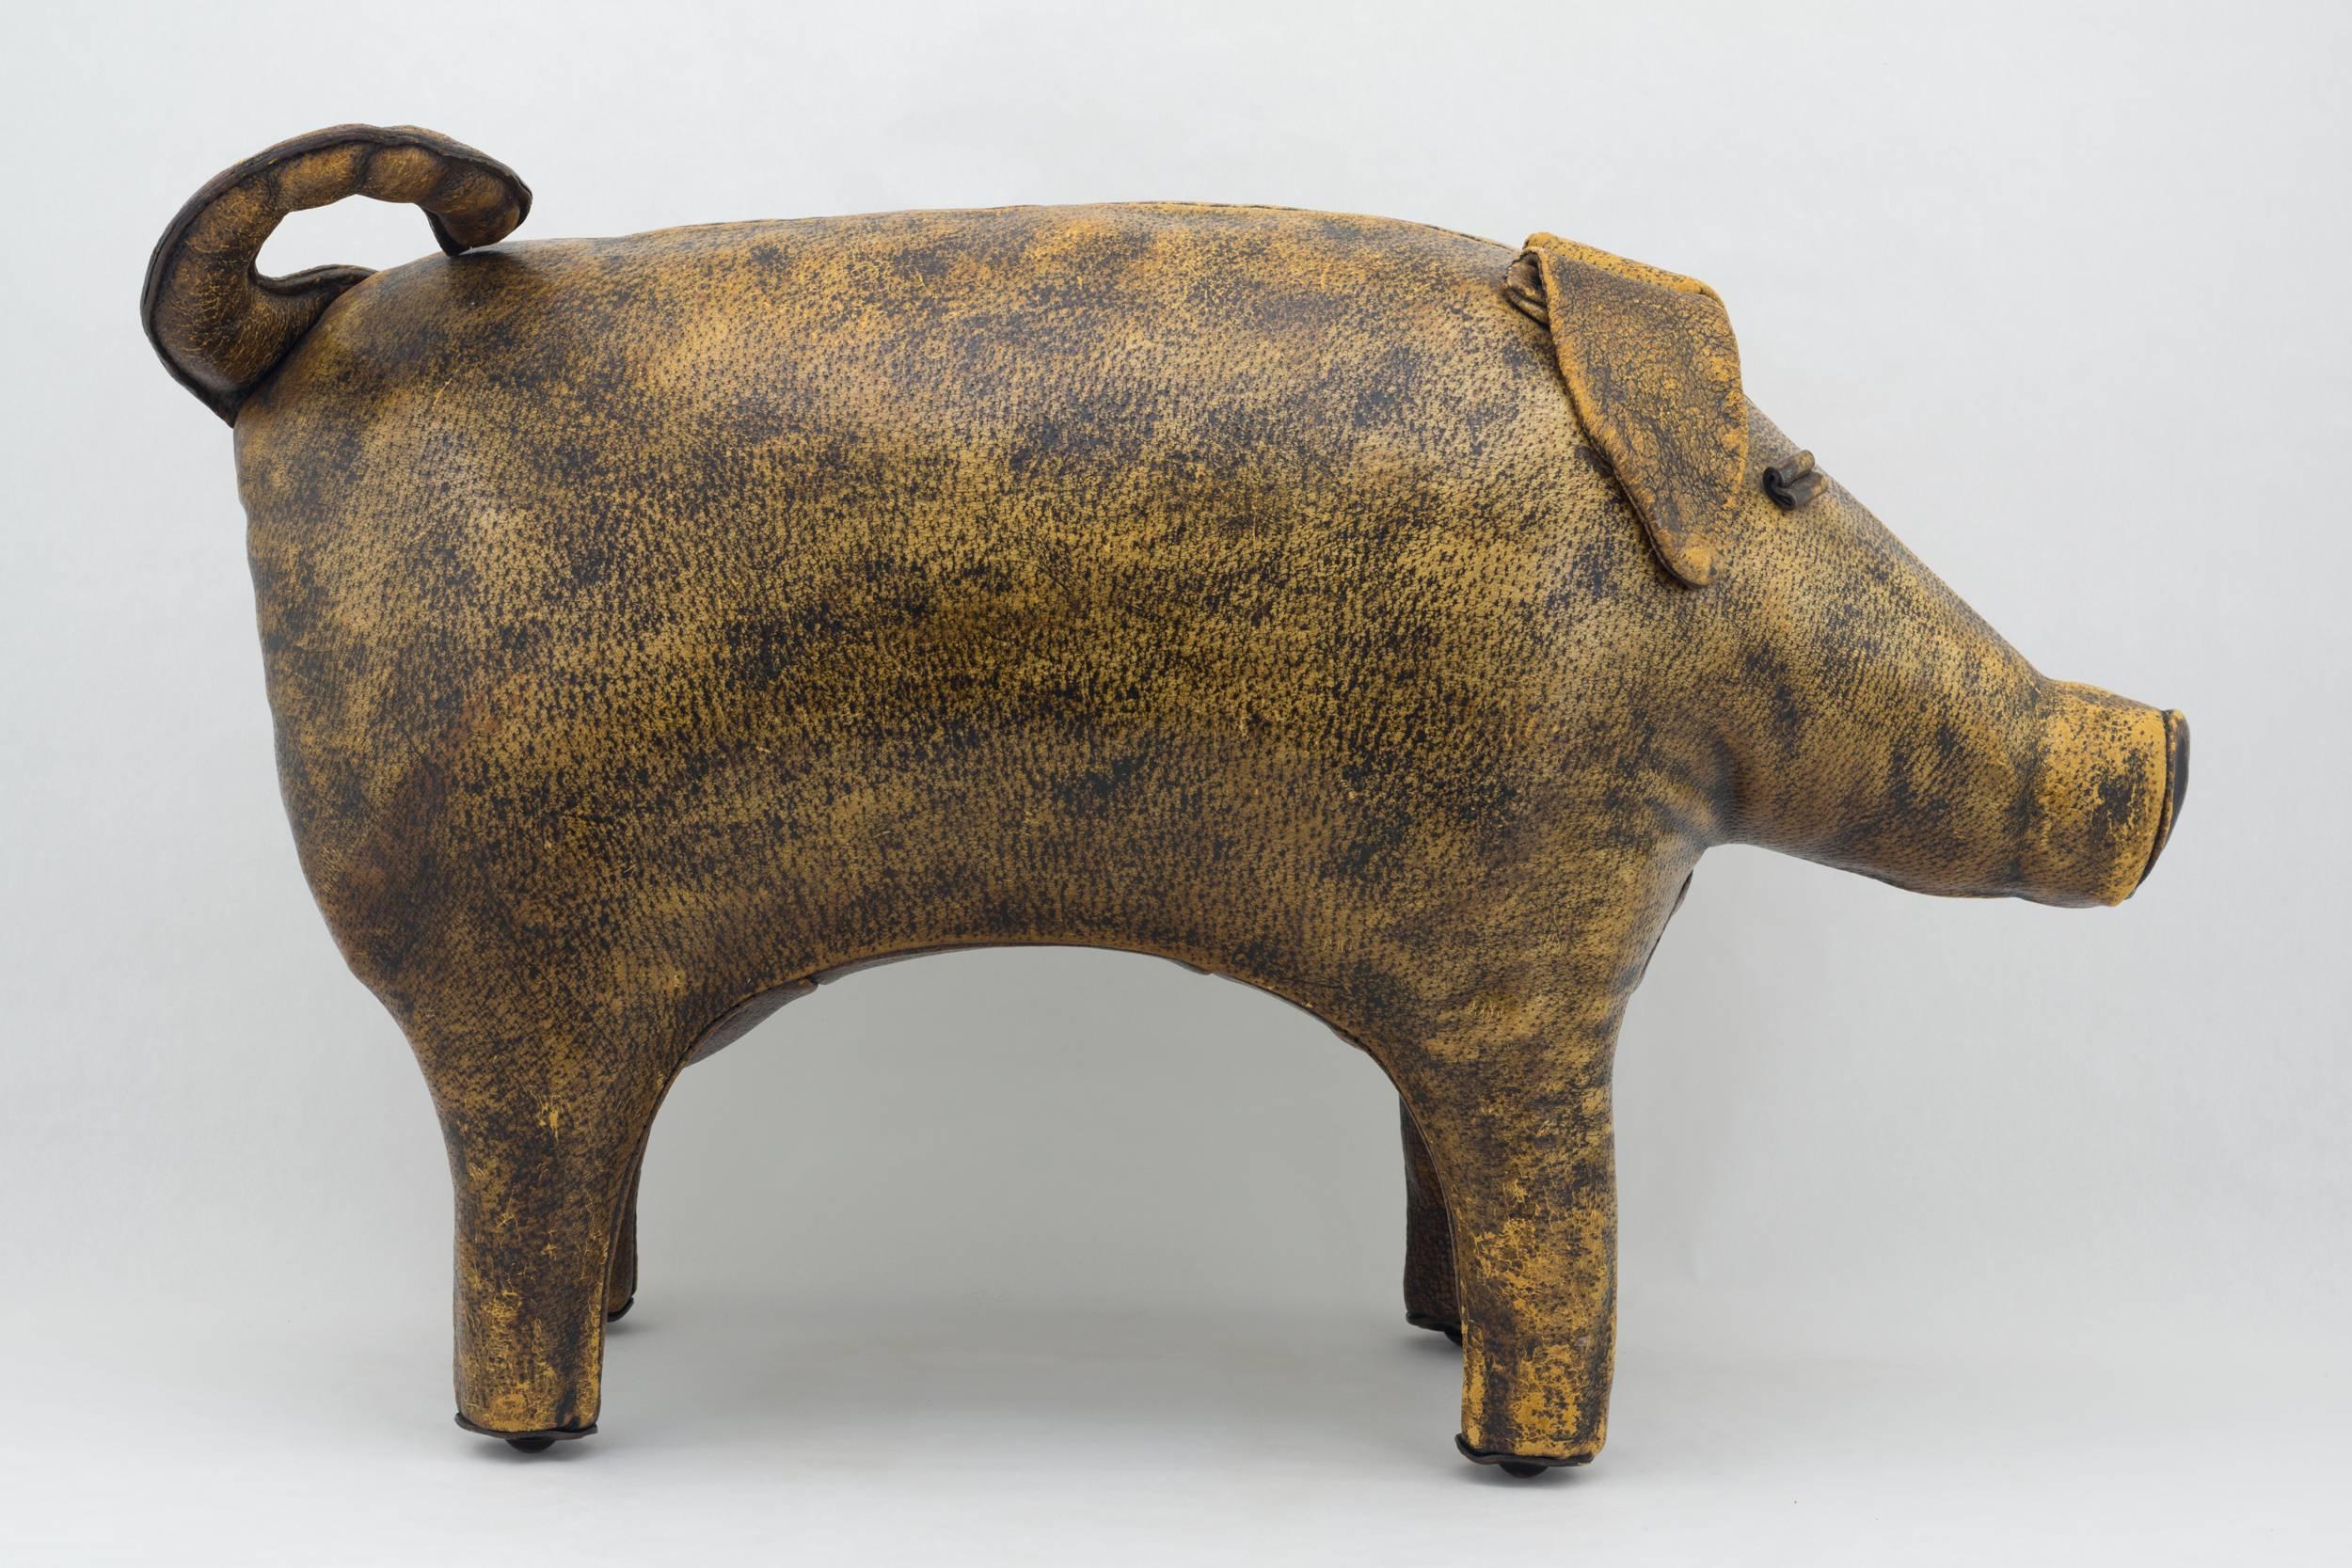 A hand-stitched and fabricated leather footrest pig, in a brown rich supple finish
showing the aged leather its texture. Hand-stitched and made by the original designer, Dimitri Omersa. Excellent condition
Measure: 16 ½” x 24” 10 ½’
English,